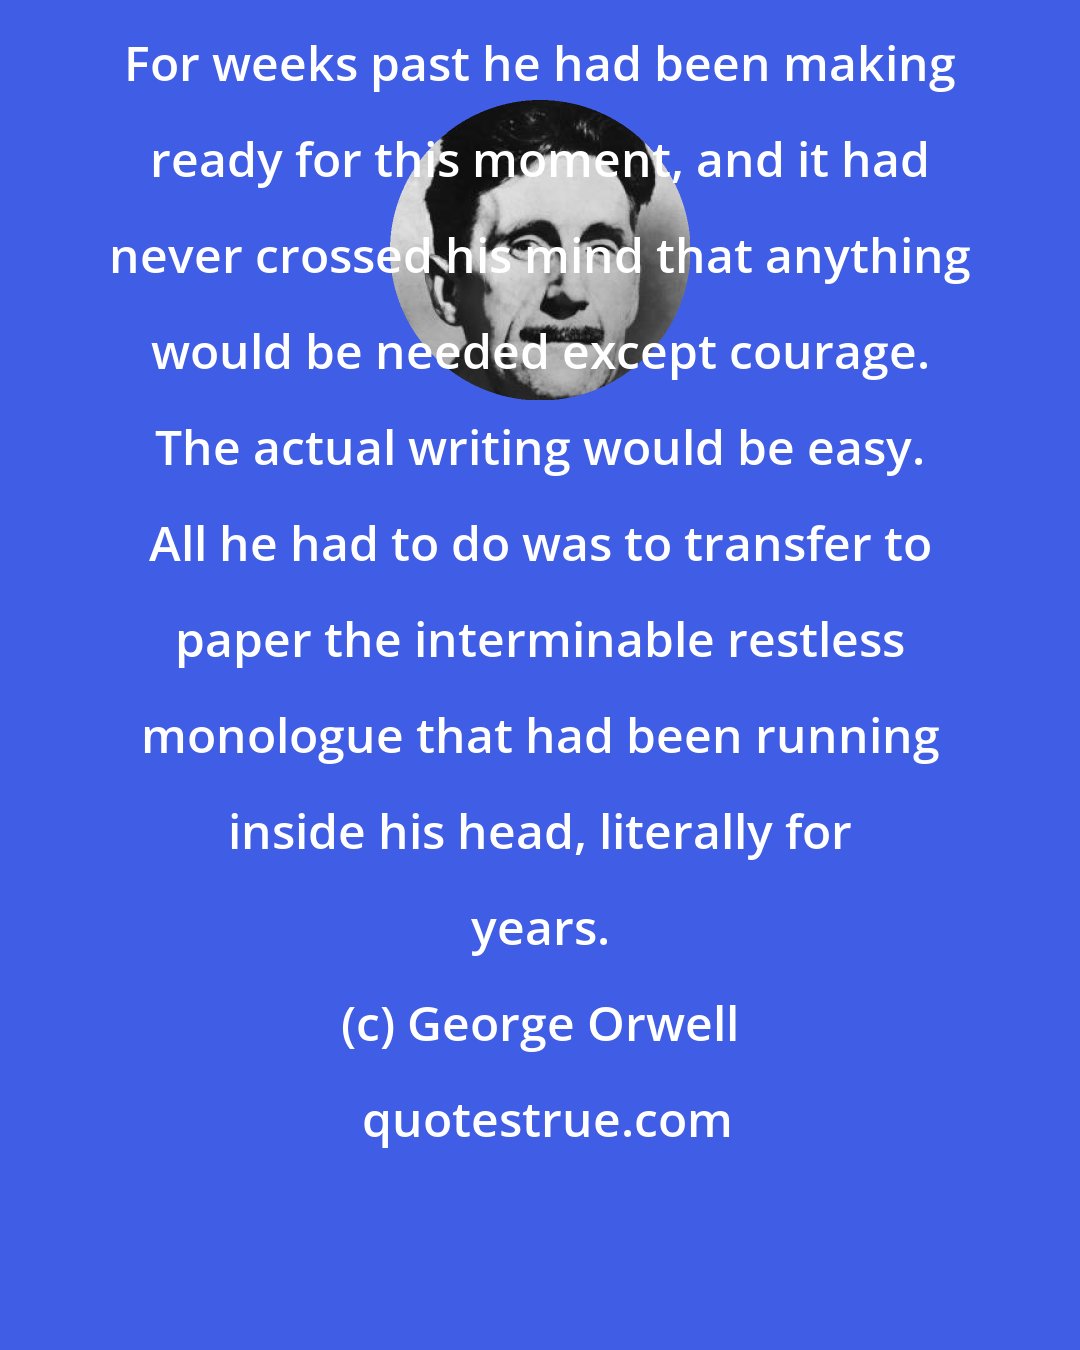 George Orwell: For weeks past he had been making ready for this moment, and it had never crossed his mind that anything would be needed except courage. The actual writing would be easy. All he had to do was to transfer to paper the interminable restless monologue that had been running inside his head, literally for years.